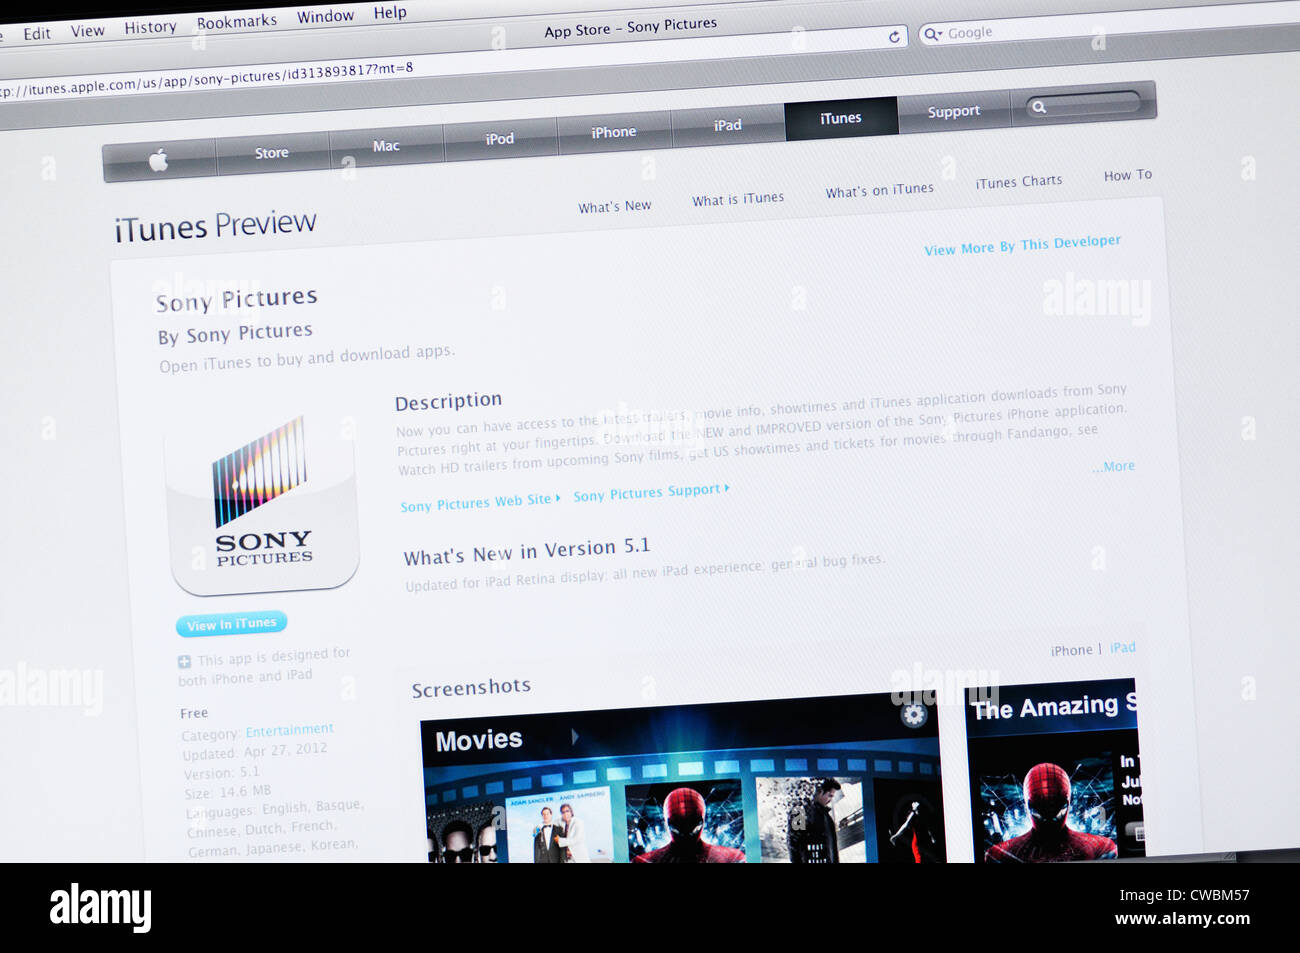 Sony Pictures app website - Read reviews, get customer ratings, see screenshots of movies Stock Photo